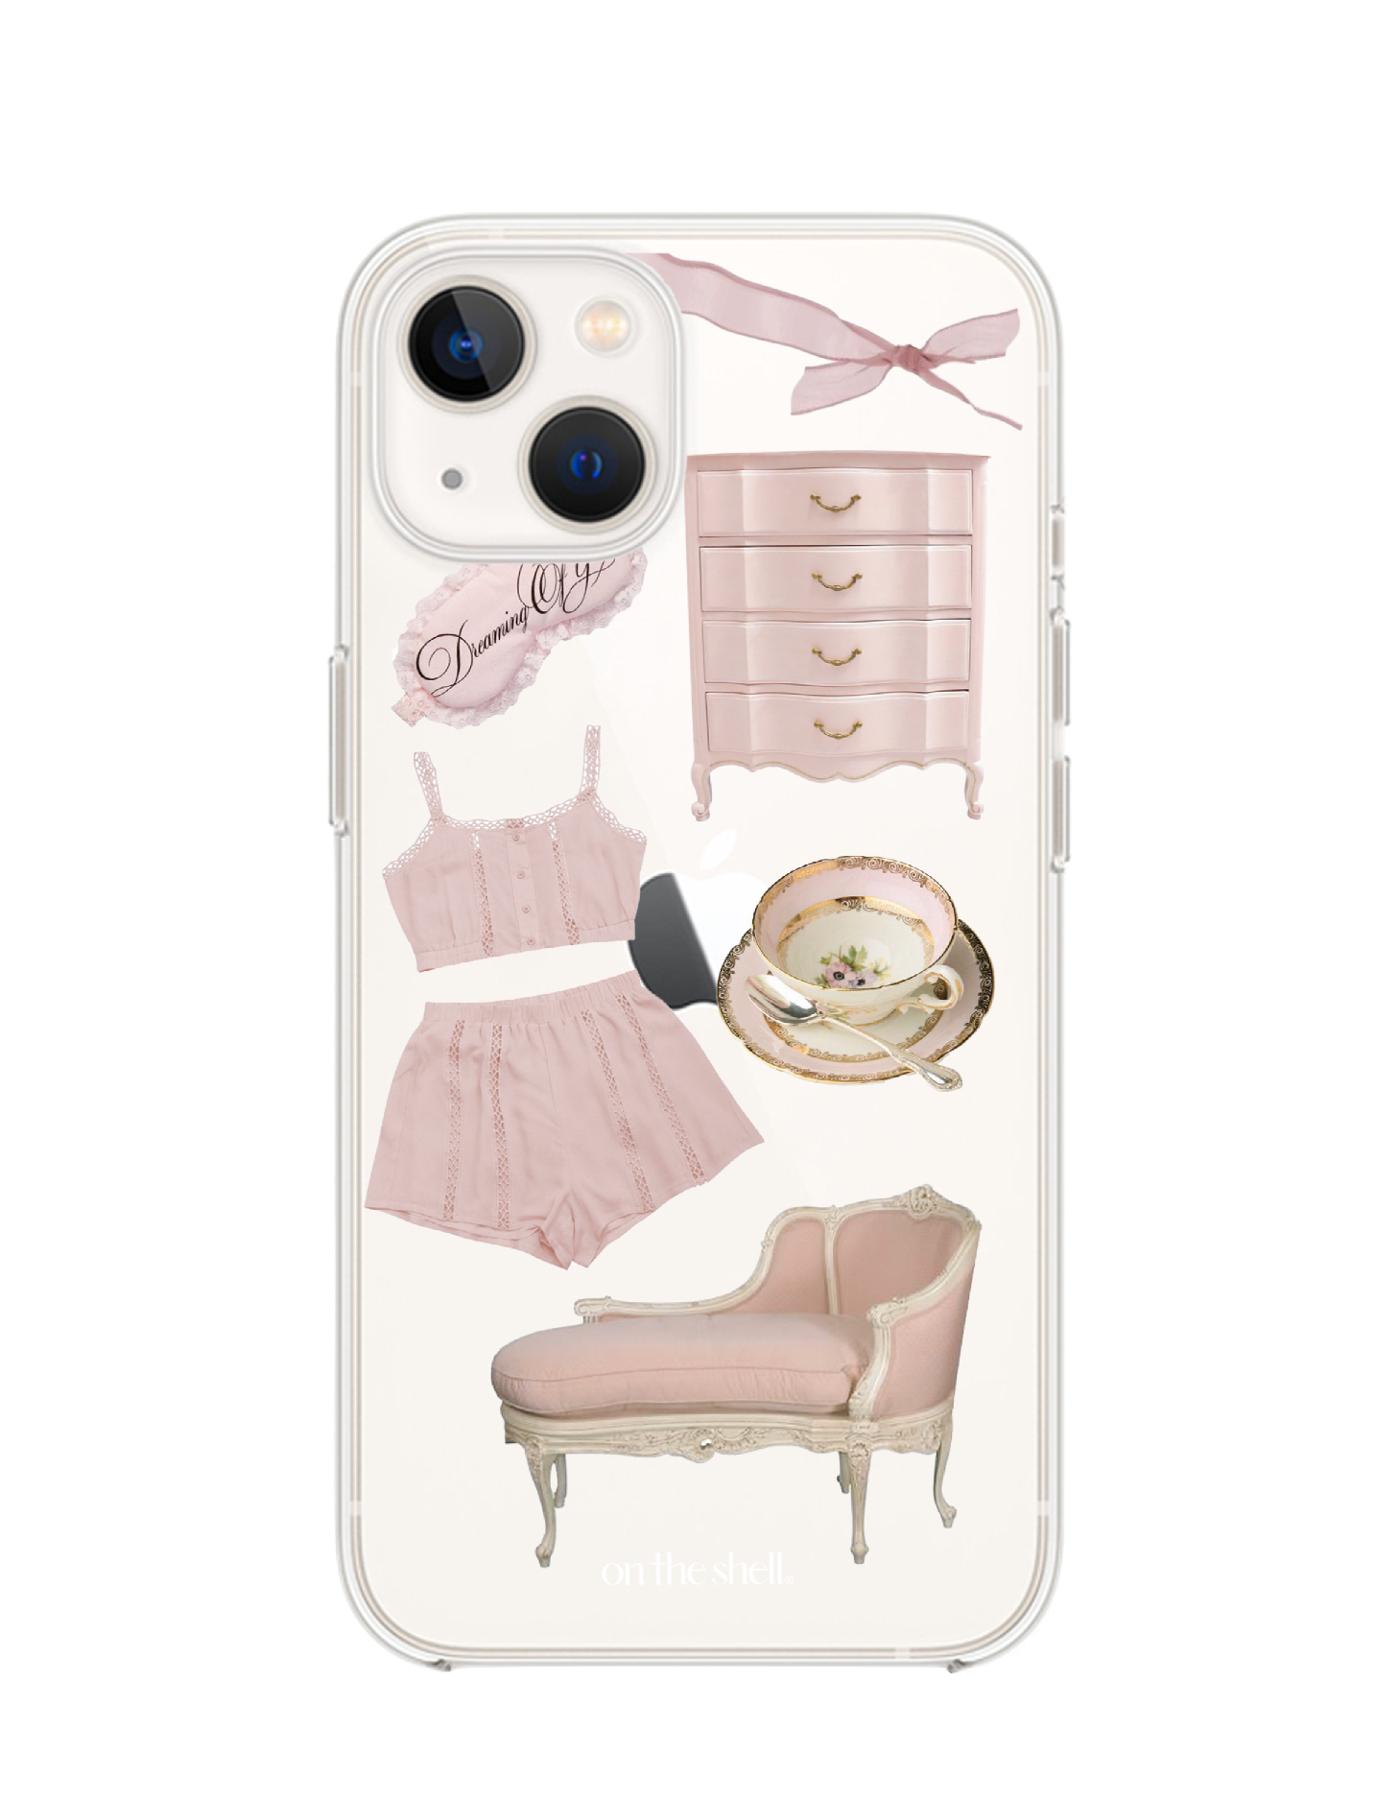 (Jell hard) Dreaming of you Iphone case